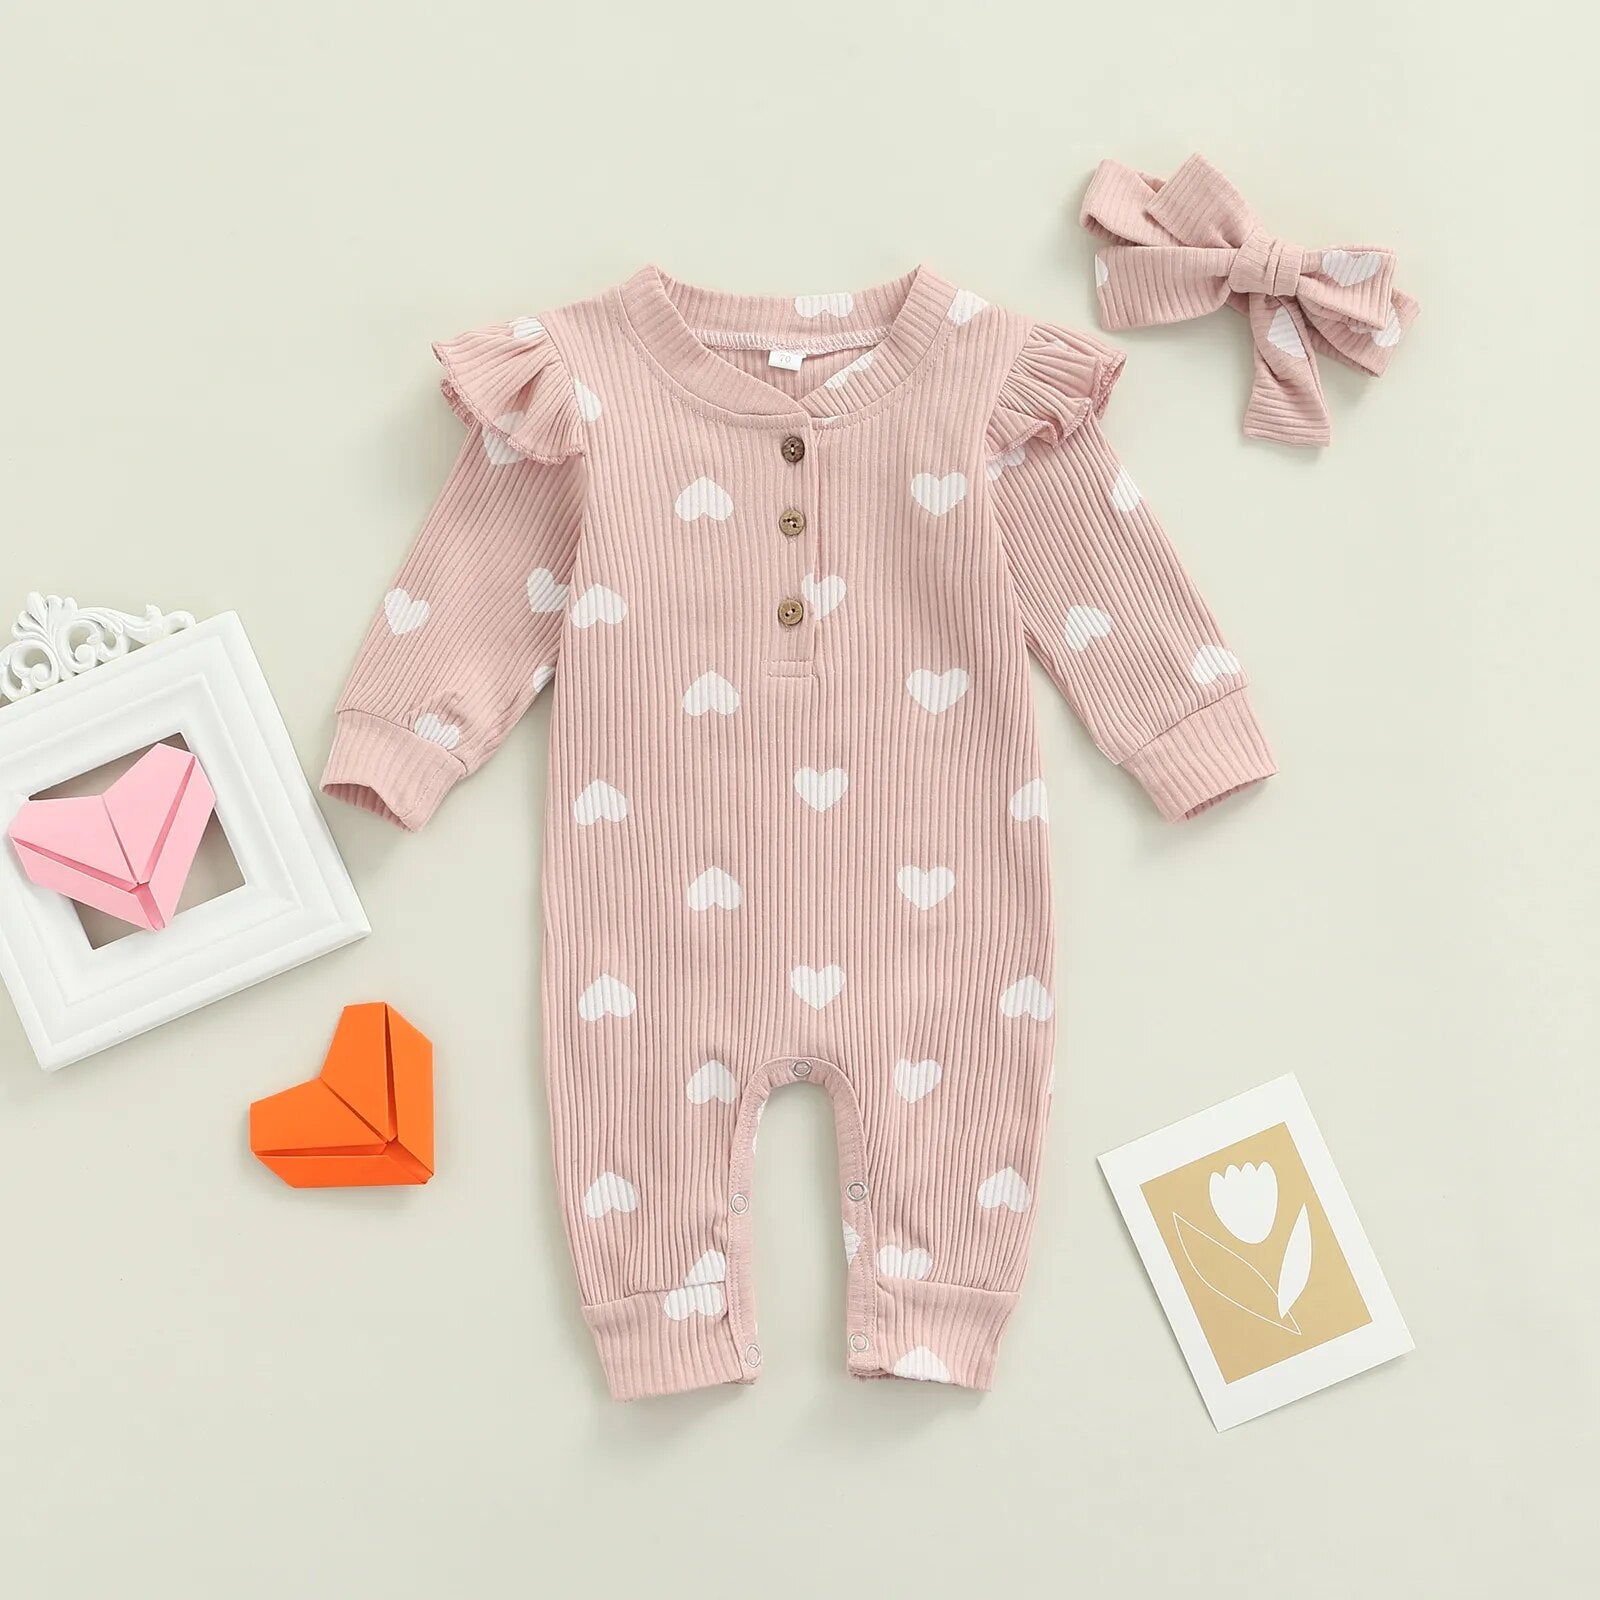 Baby Heart Print Rompers for Valentine's Day